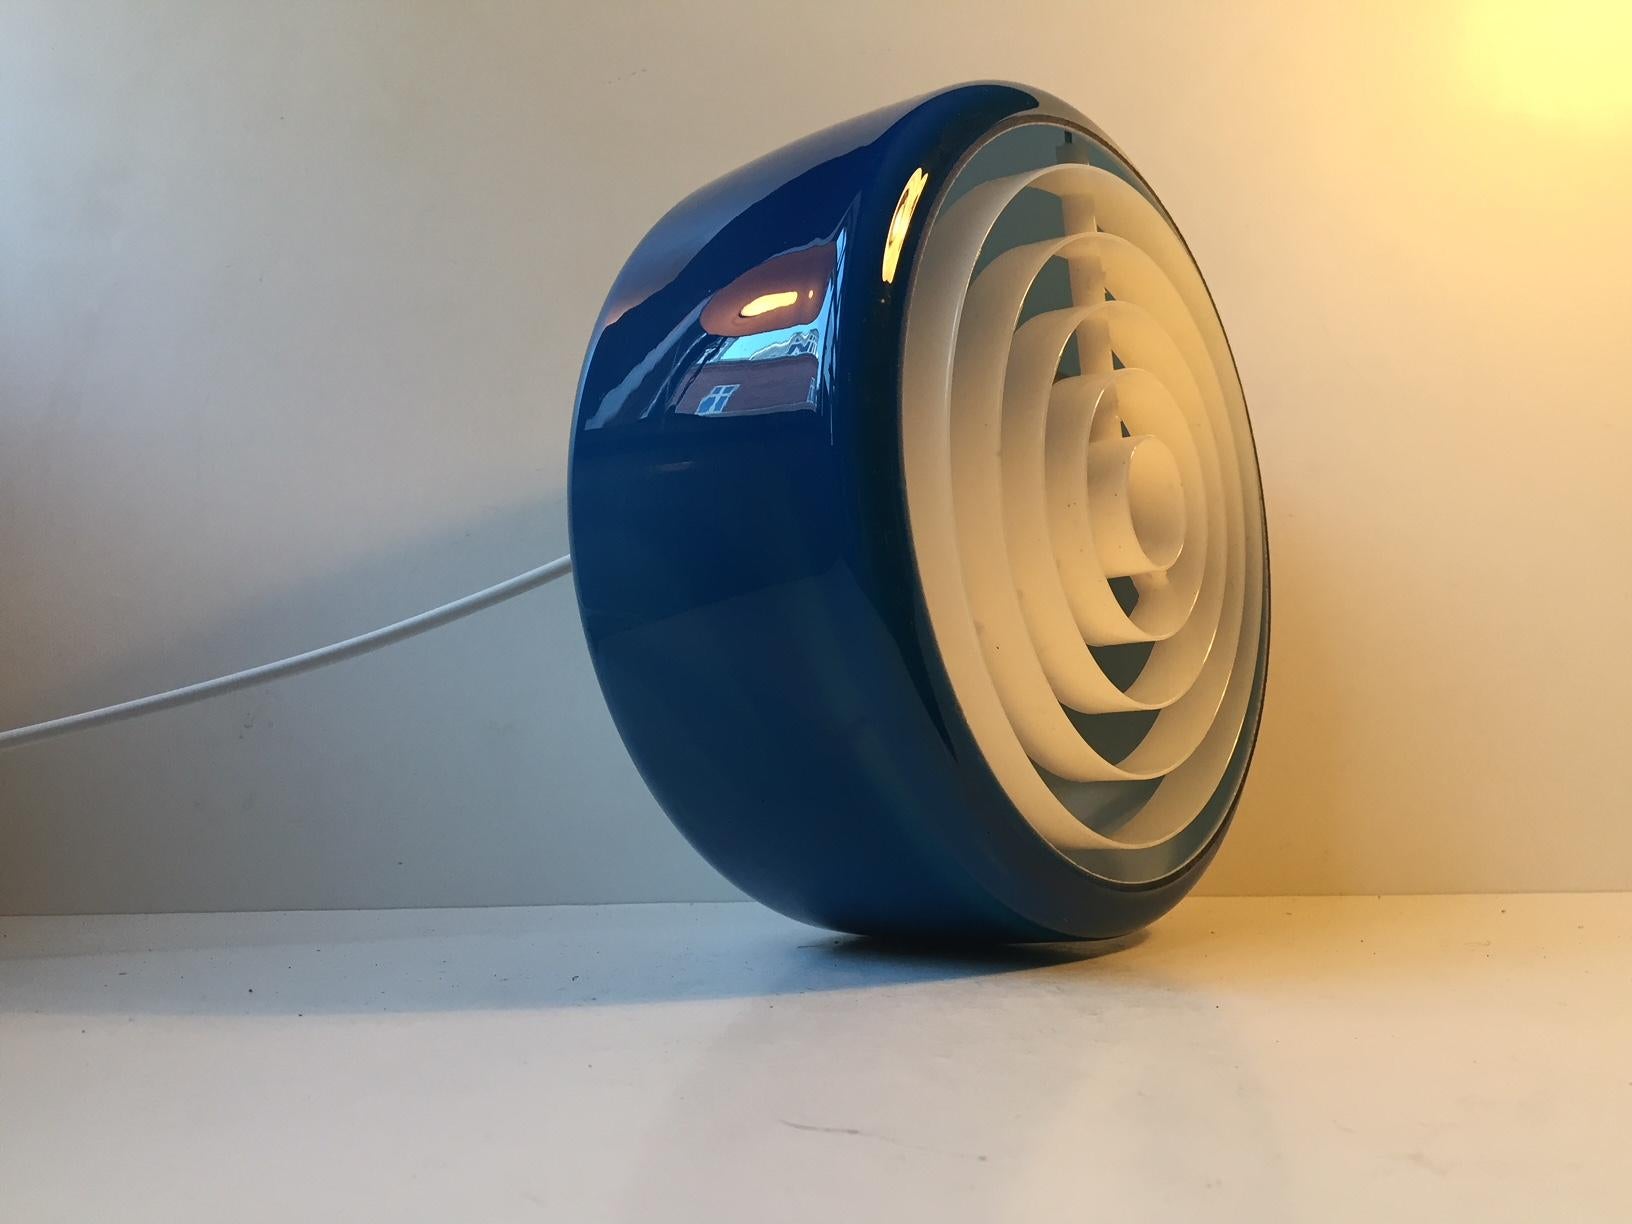 A vintage flush mount ceiling lamp designed for rooms corridors with low ceiling heights. It was made in the 1970s by NSC (Nordisk Solar Compagni) in Denmark. The blue cased opaline glass shade was made at Holmegaard for NSC. When lid it turns from